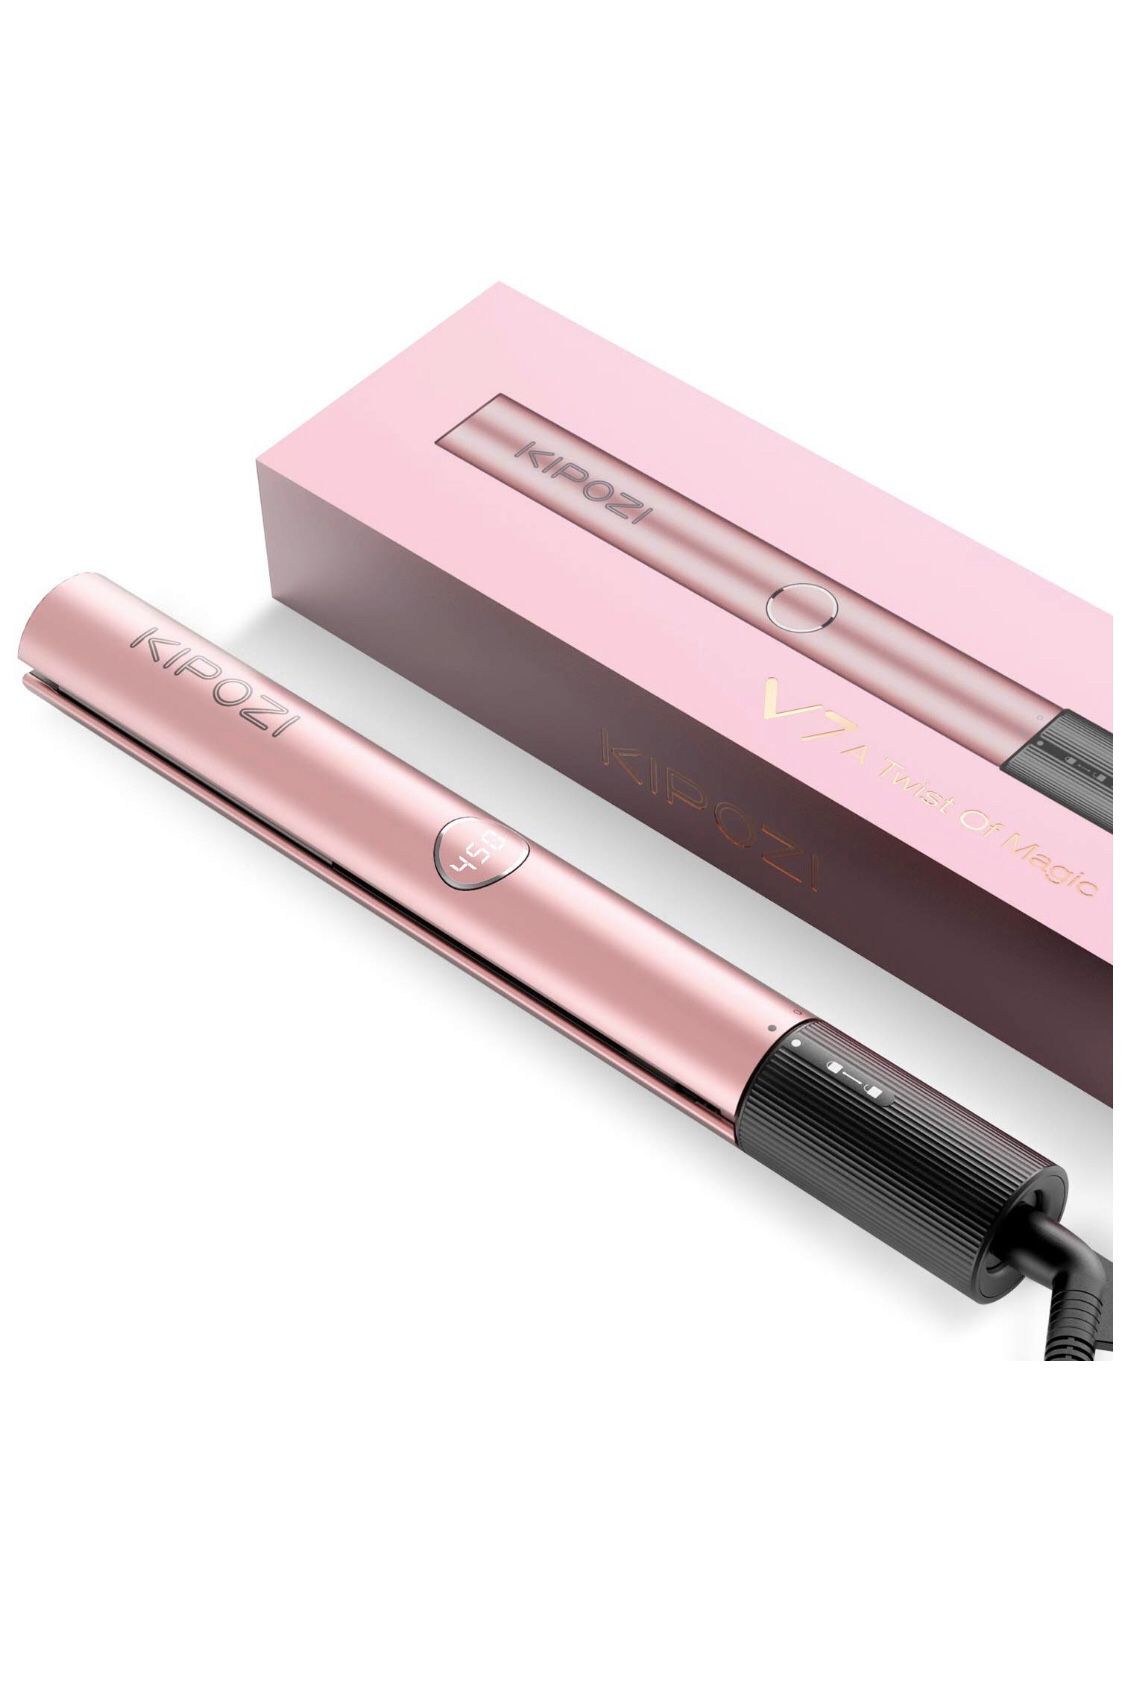 NEW!! KIPOZI Hair Straightener, 2 in 1 Straightener and Curling iron, Titanium Flat Iron for Hair with Salon High Heat 450℉, V7 in Rose Gold